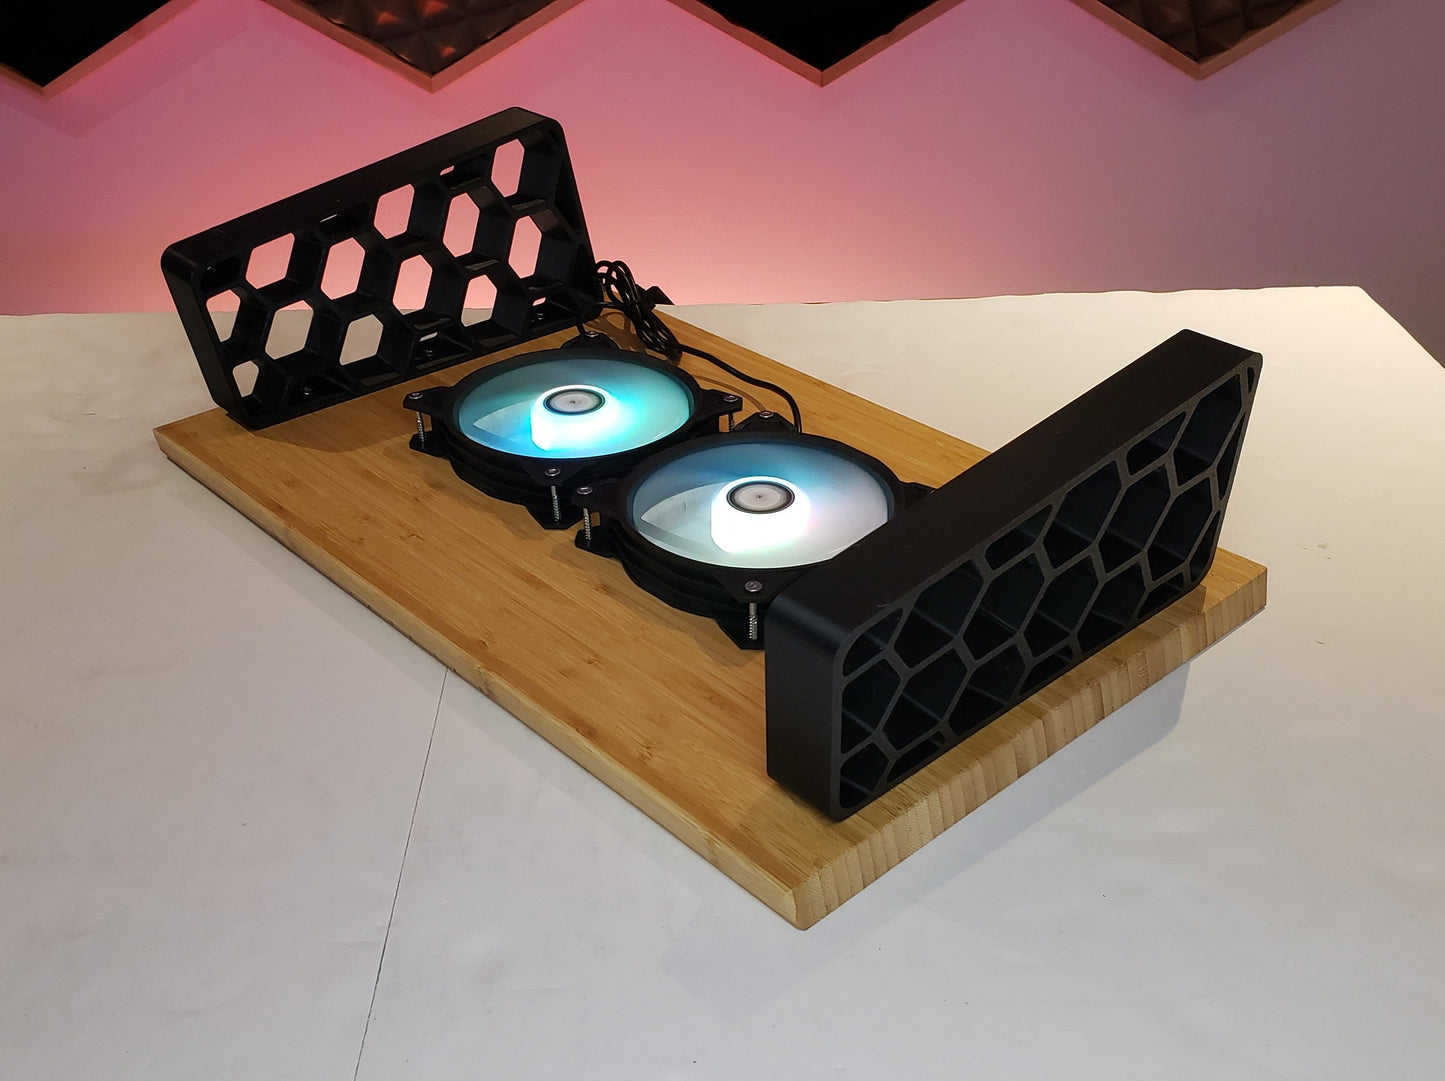 Bamboo Laptop Cooling Riser Pad With (Optional) RGB Fans and HEX Feet